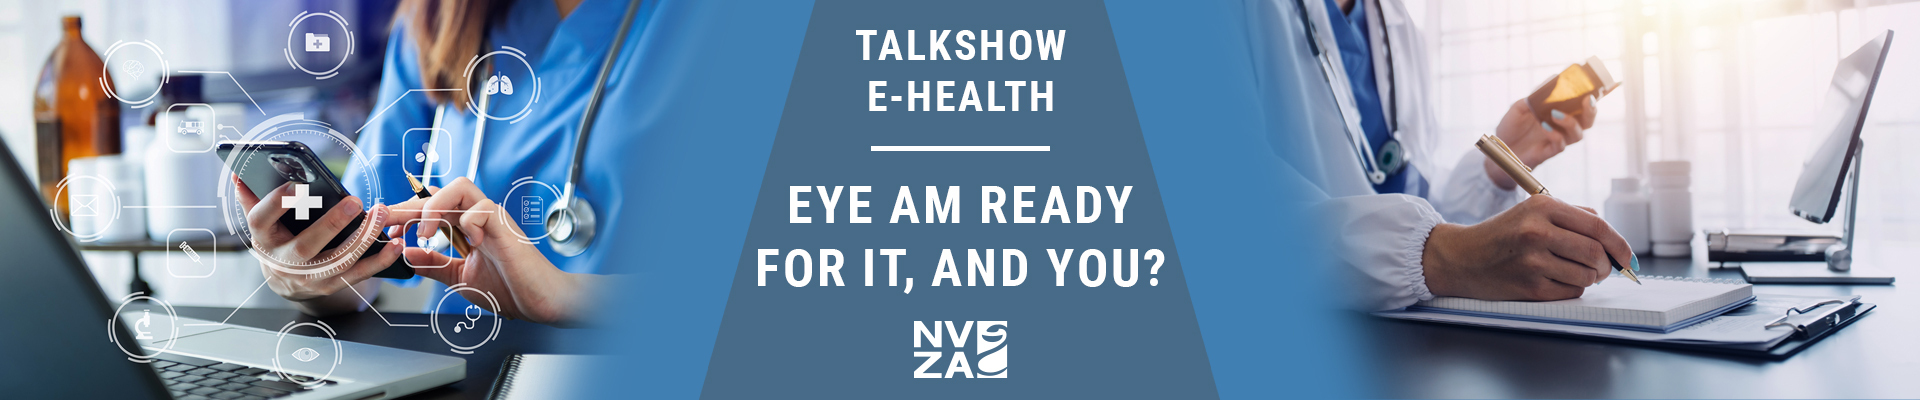 E-health: Eye am ready for it, and you? 